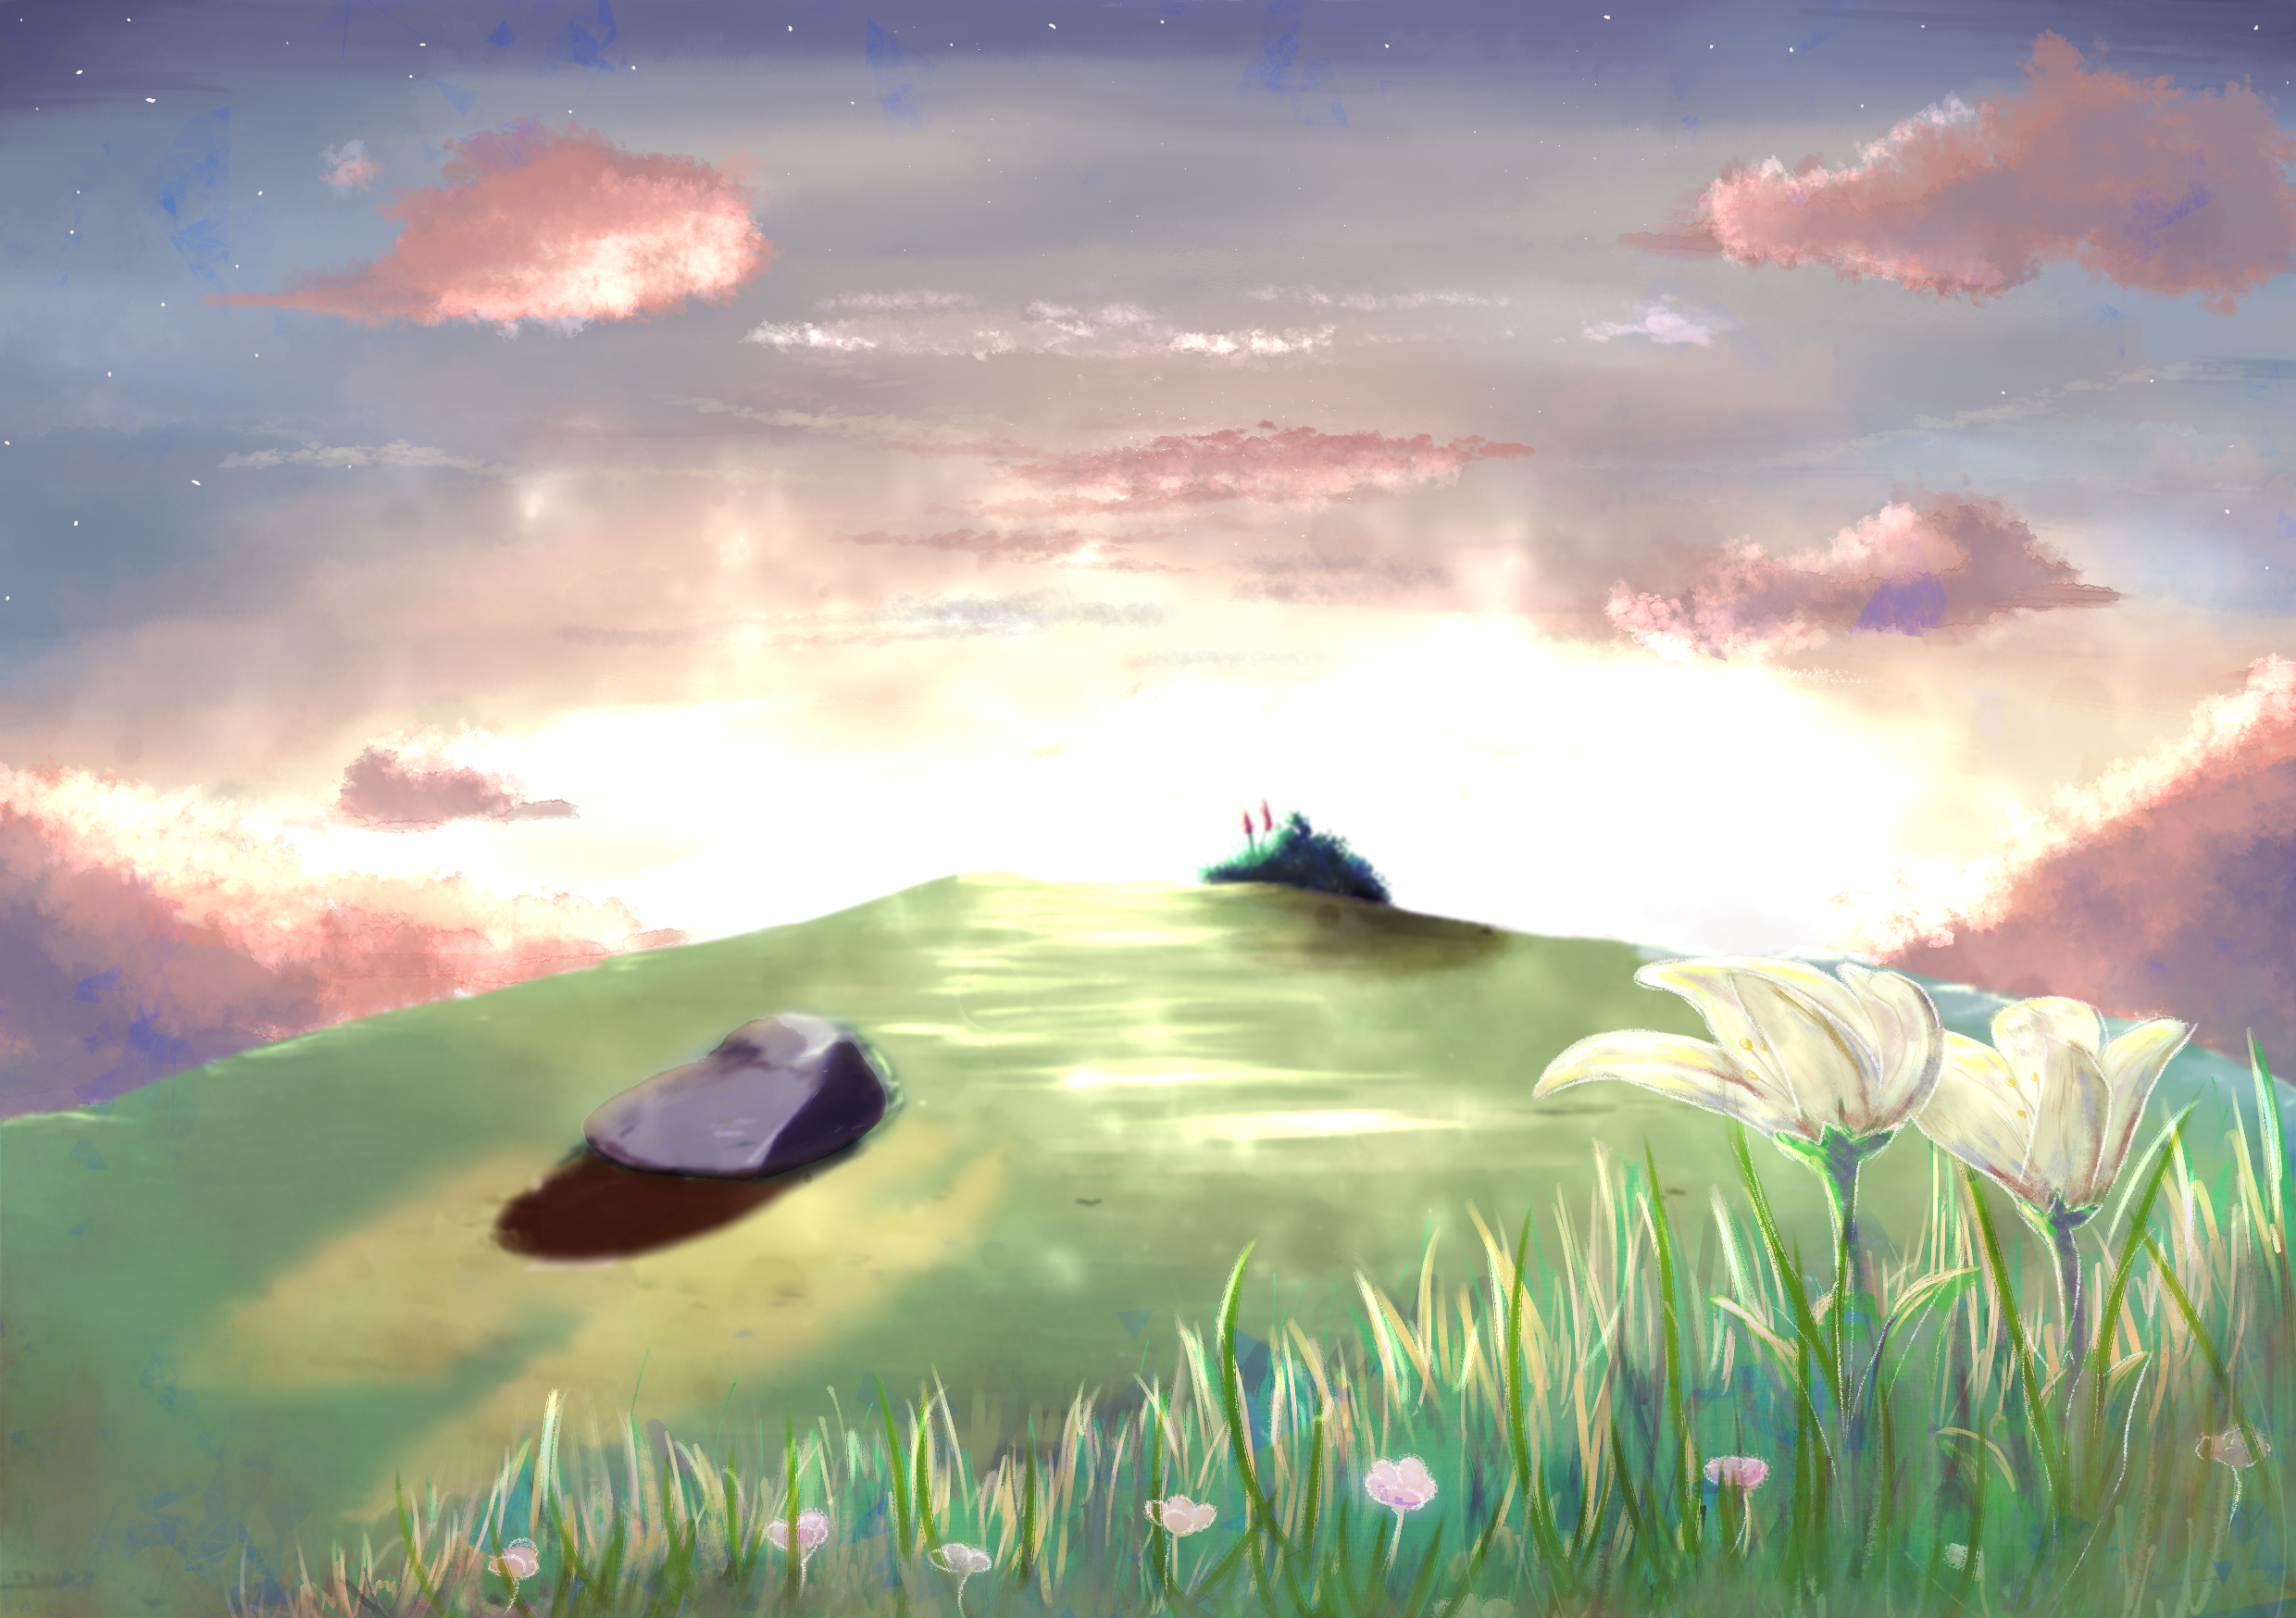 digital painting of grassy cliff with a stone, trees, flowers, with sun setting behind cliff, clouds and stars in sky